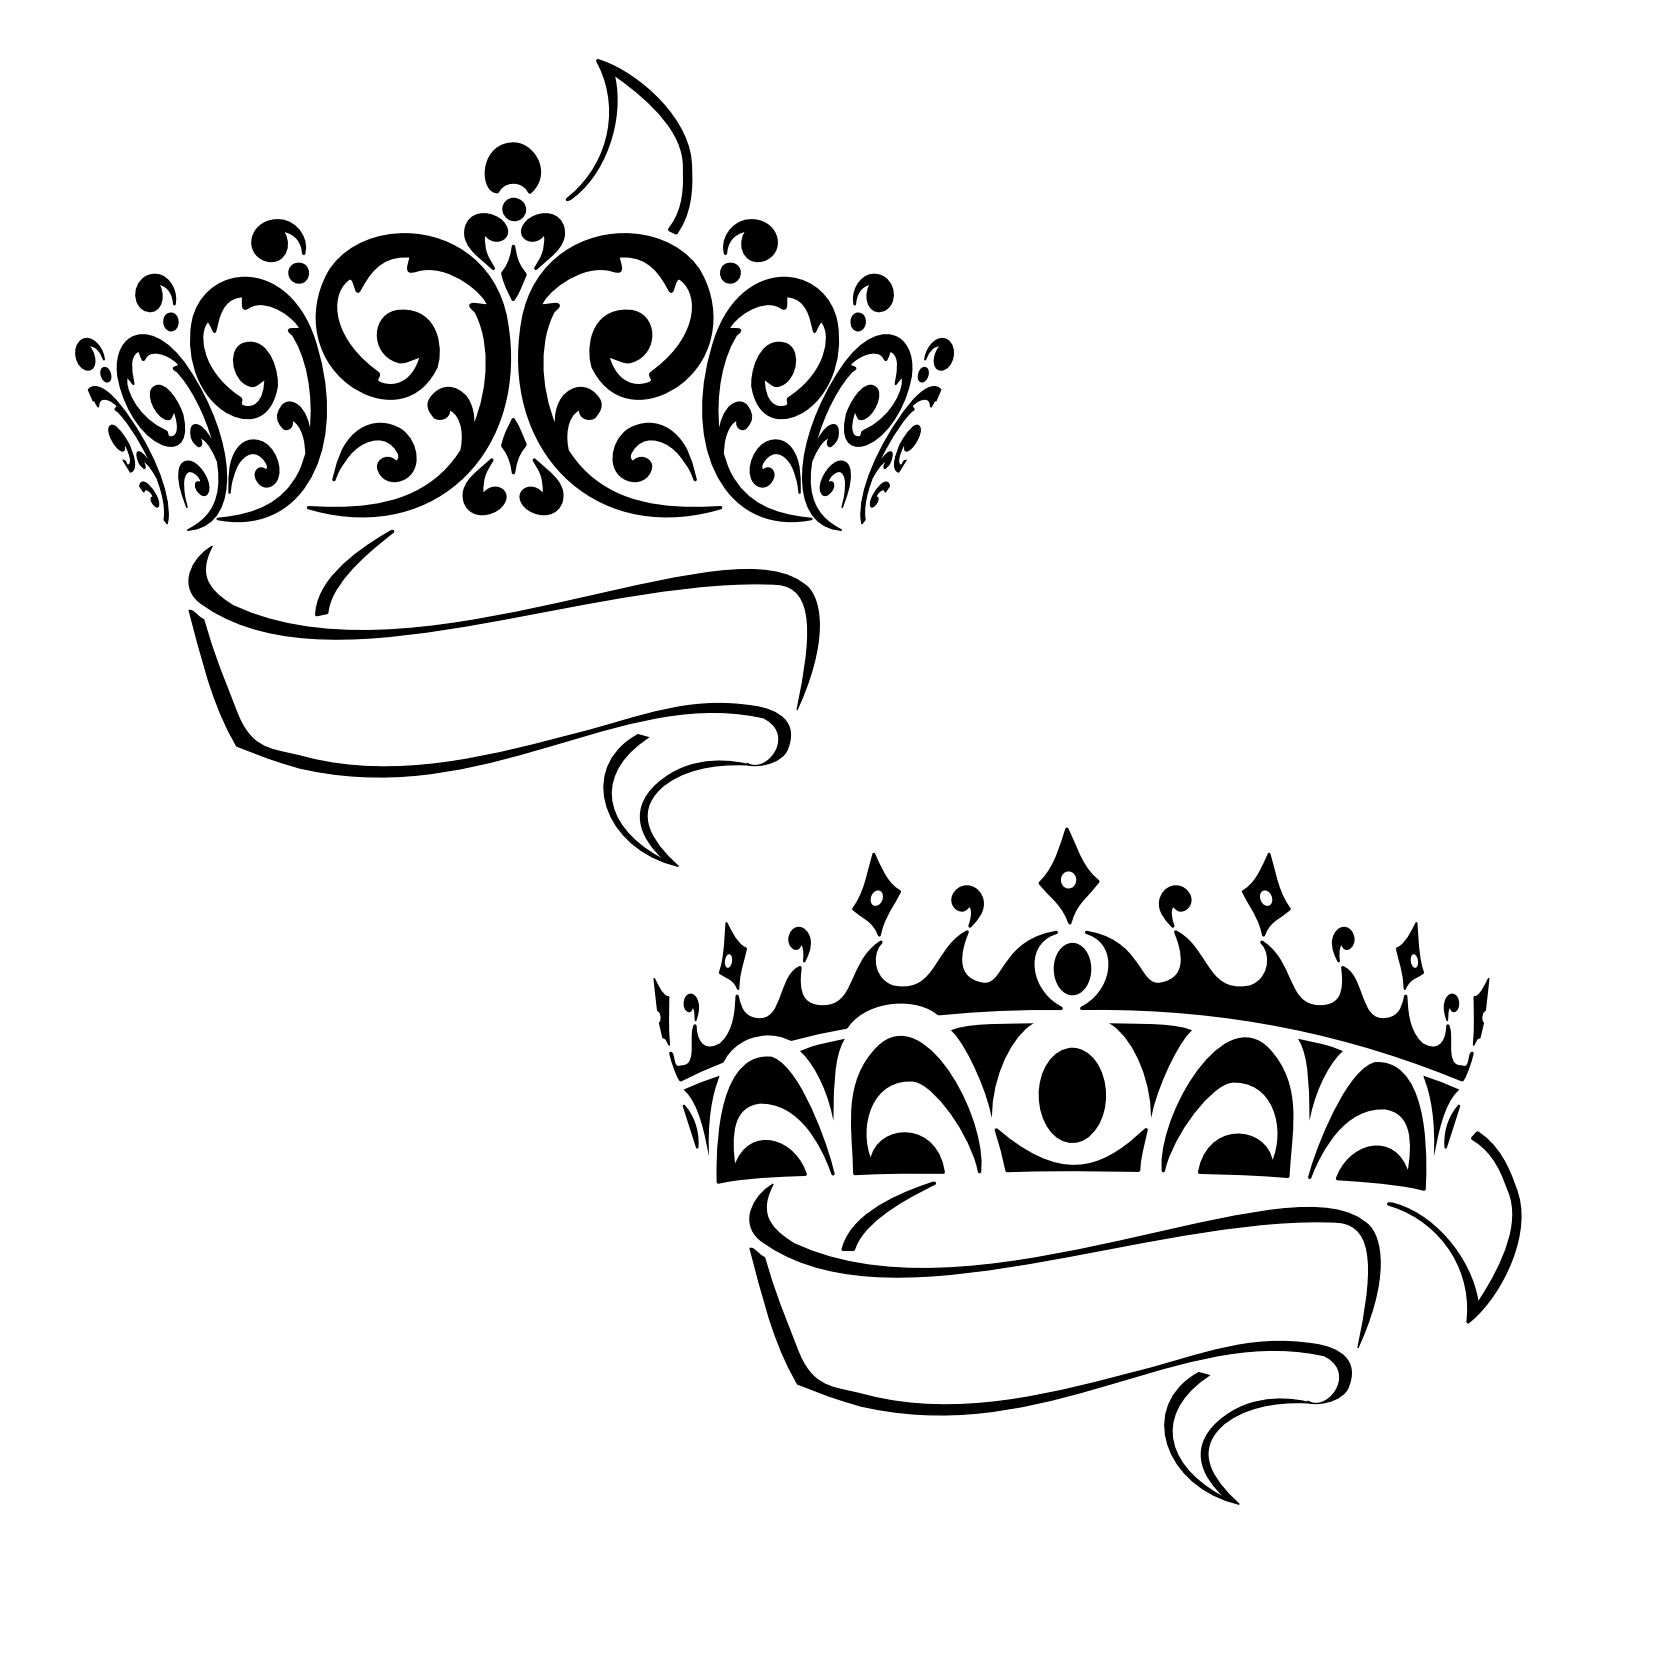 Prince and princess crown clipart